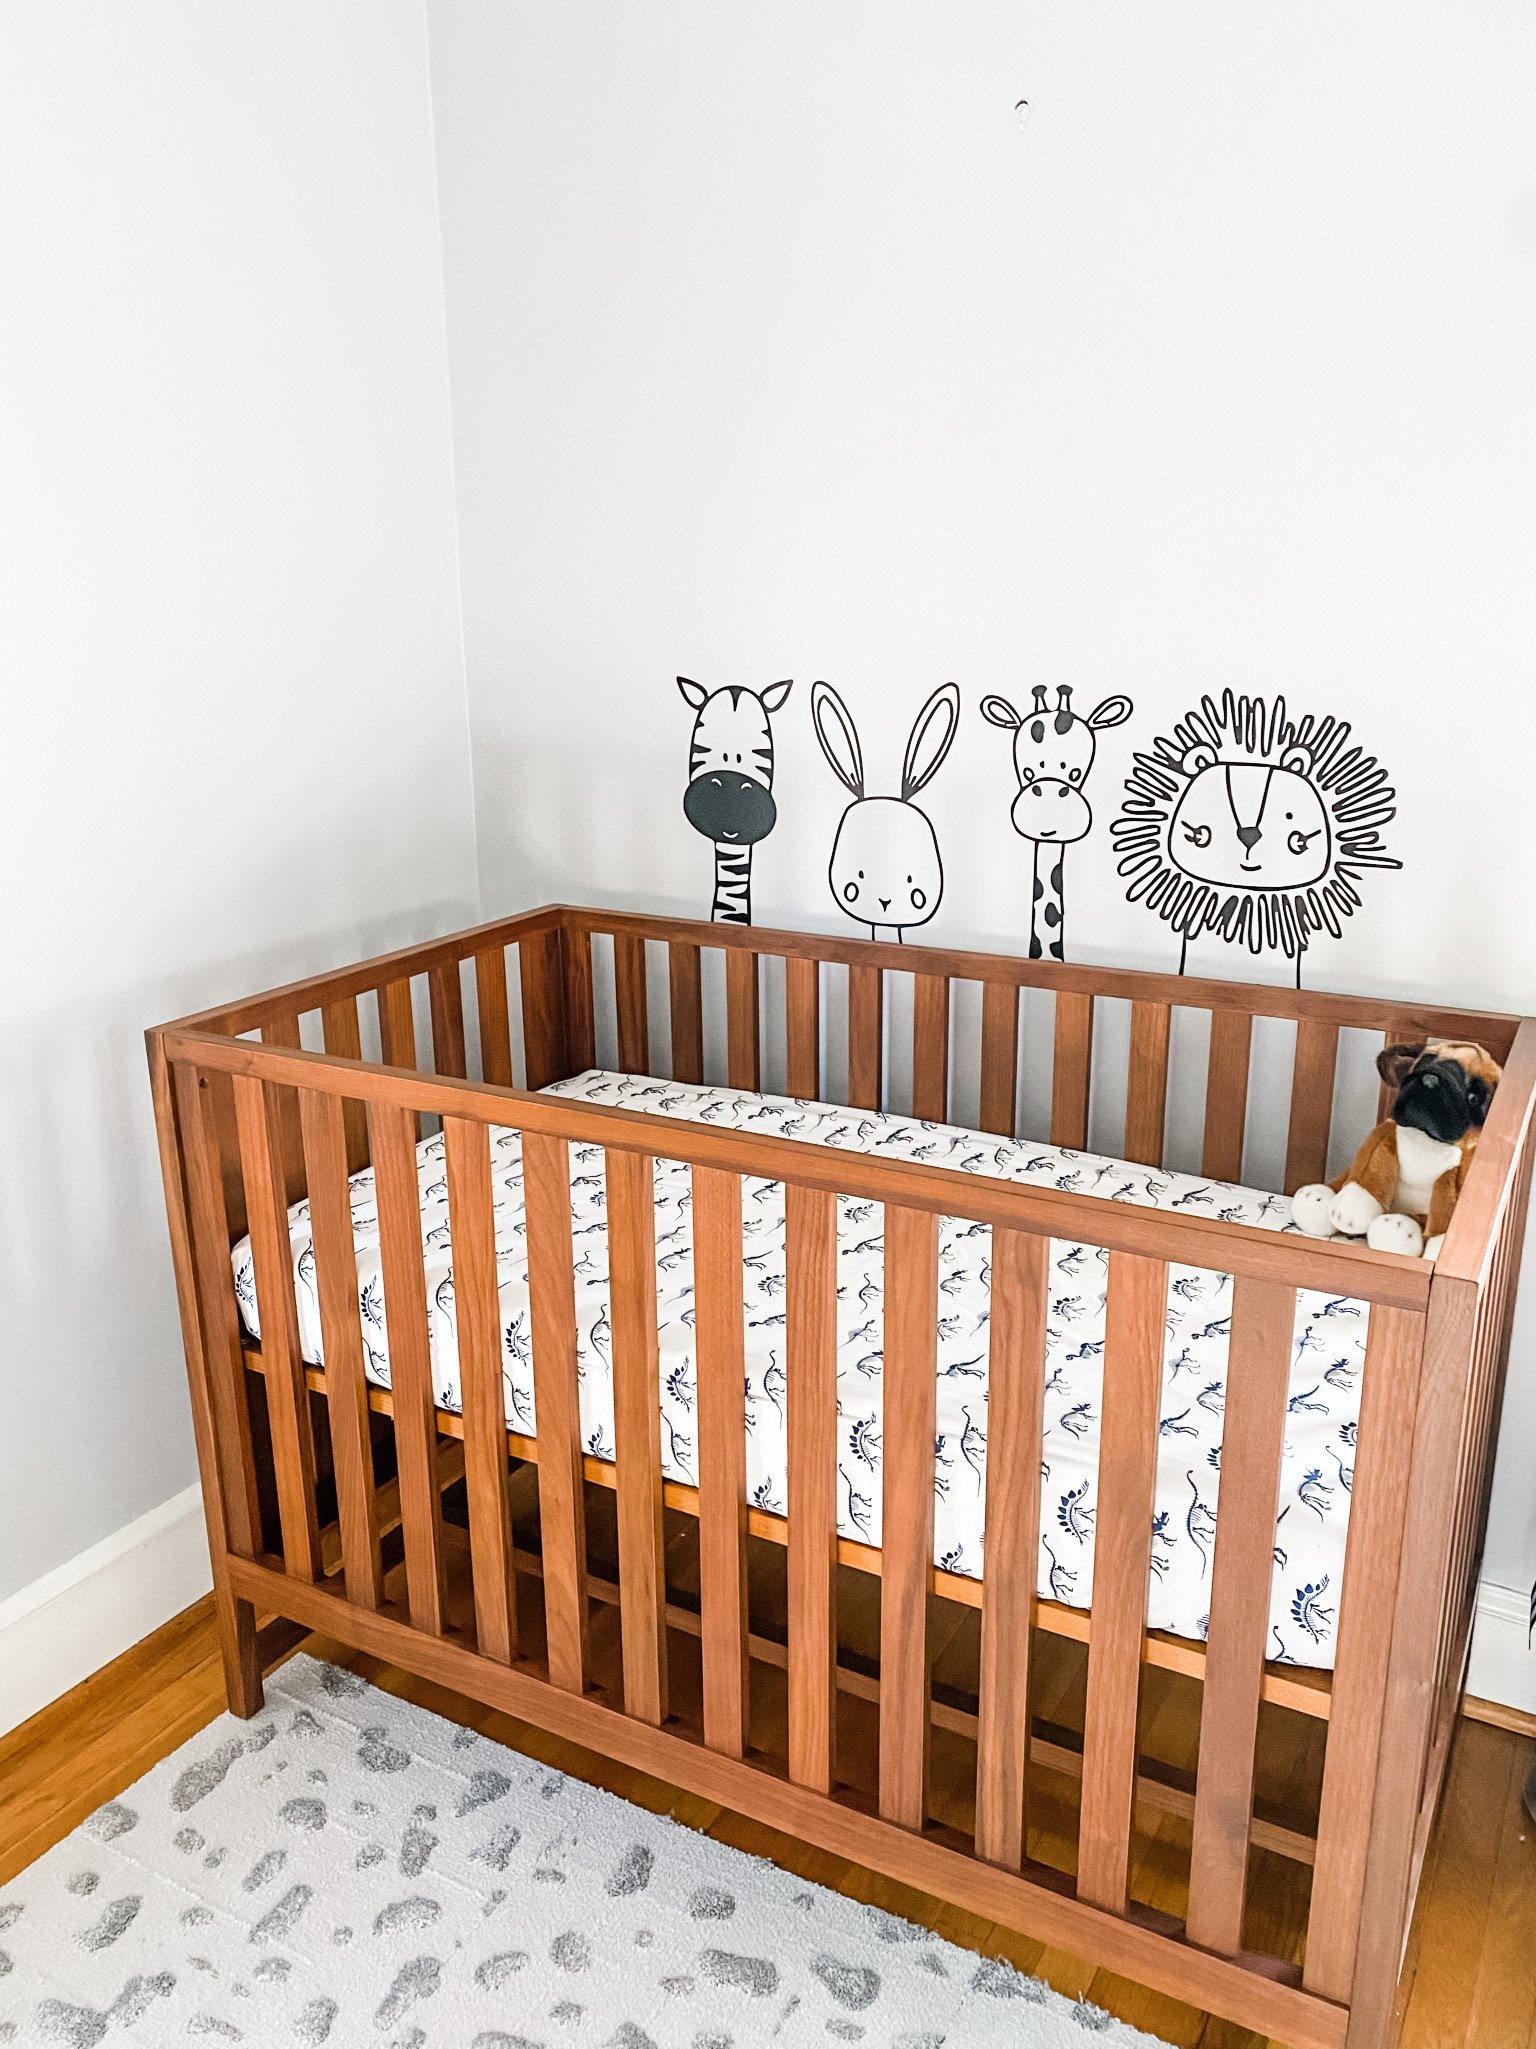 Our Baby Boy Nursery | Unnecessary Baby Registry Items